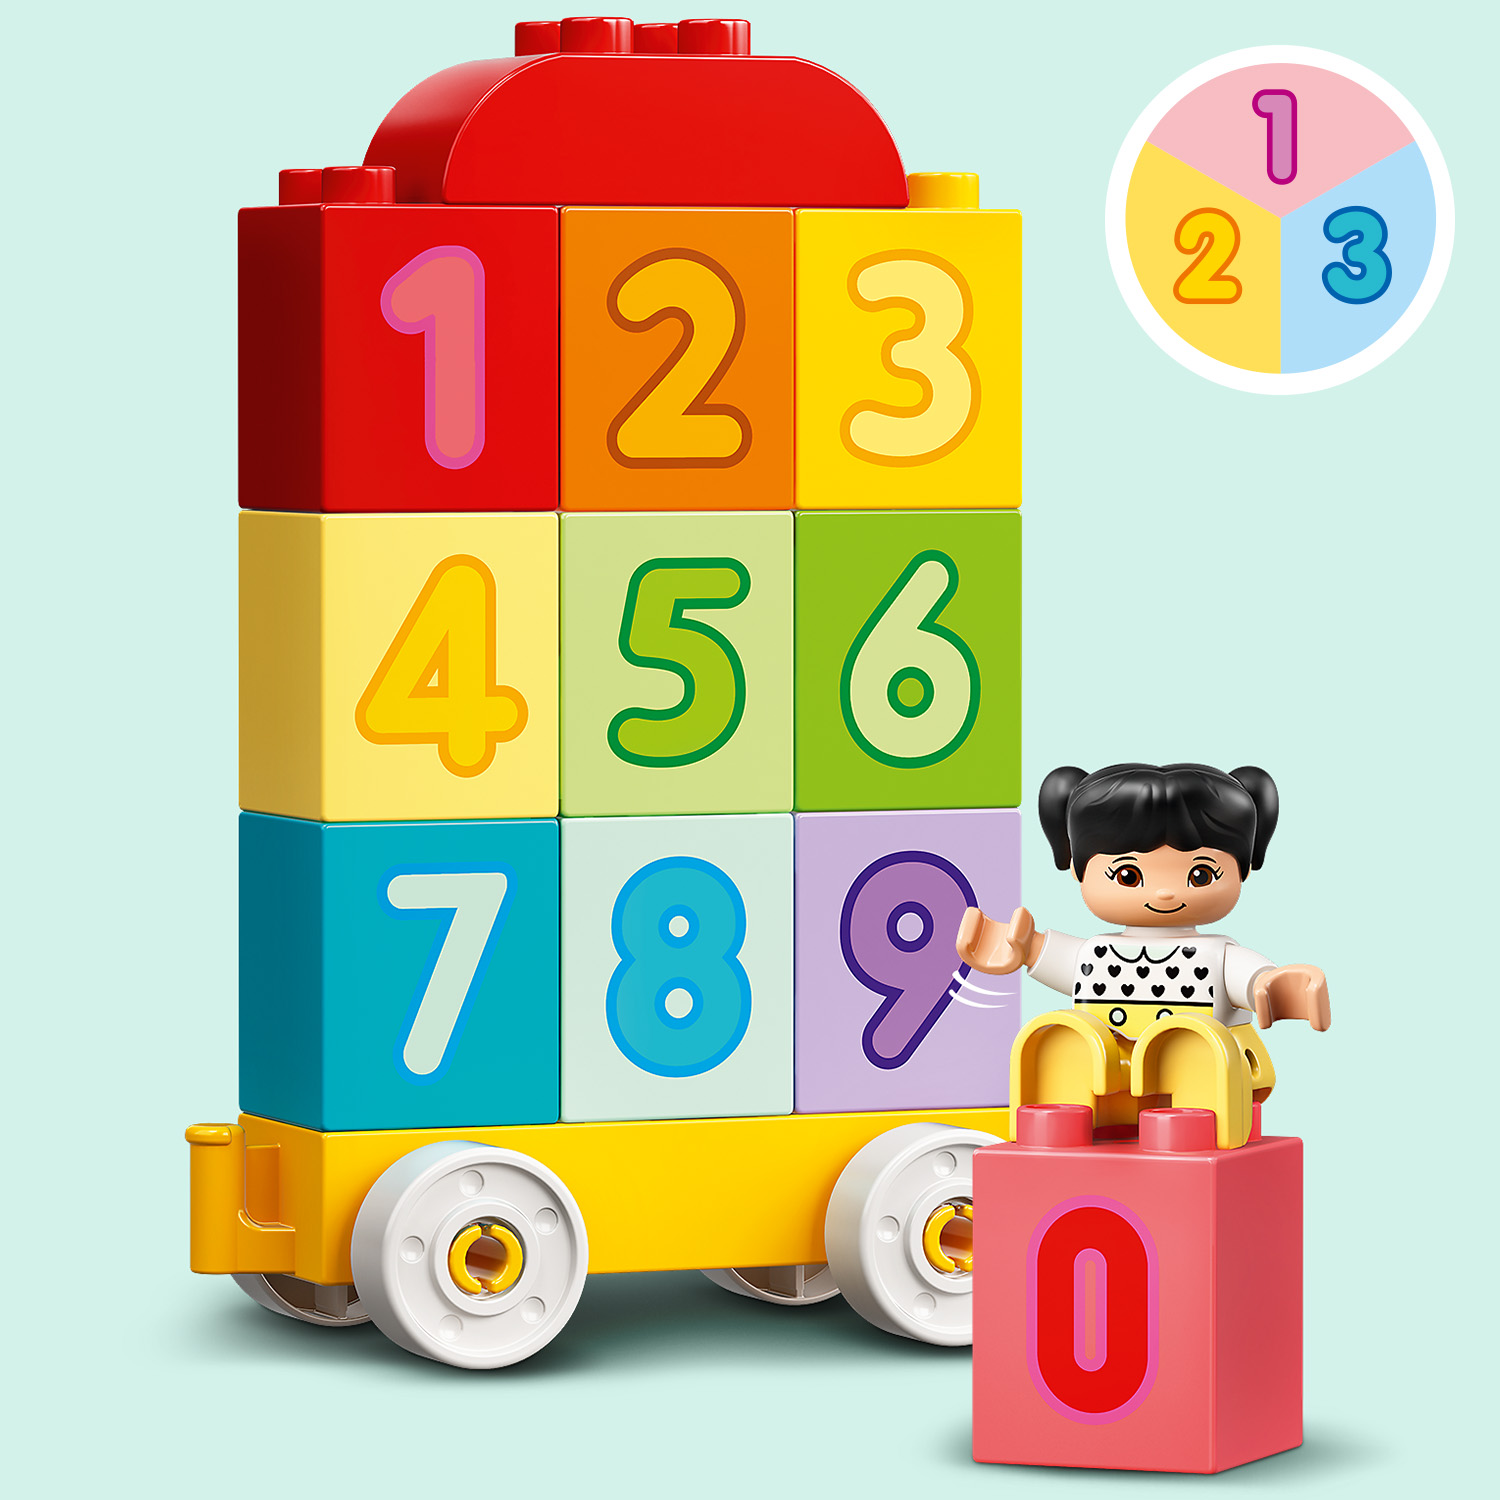 LEGO DUPLO My First Number Train Learn To Count 10954 6332184 - Best Buy